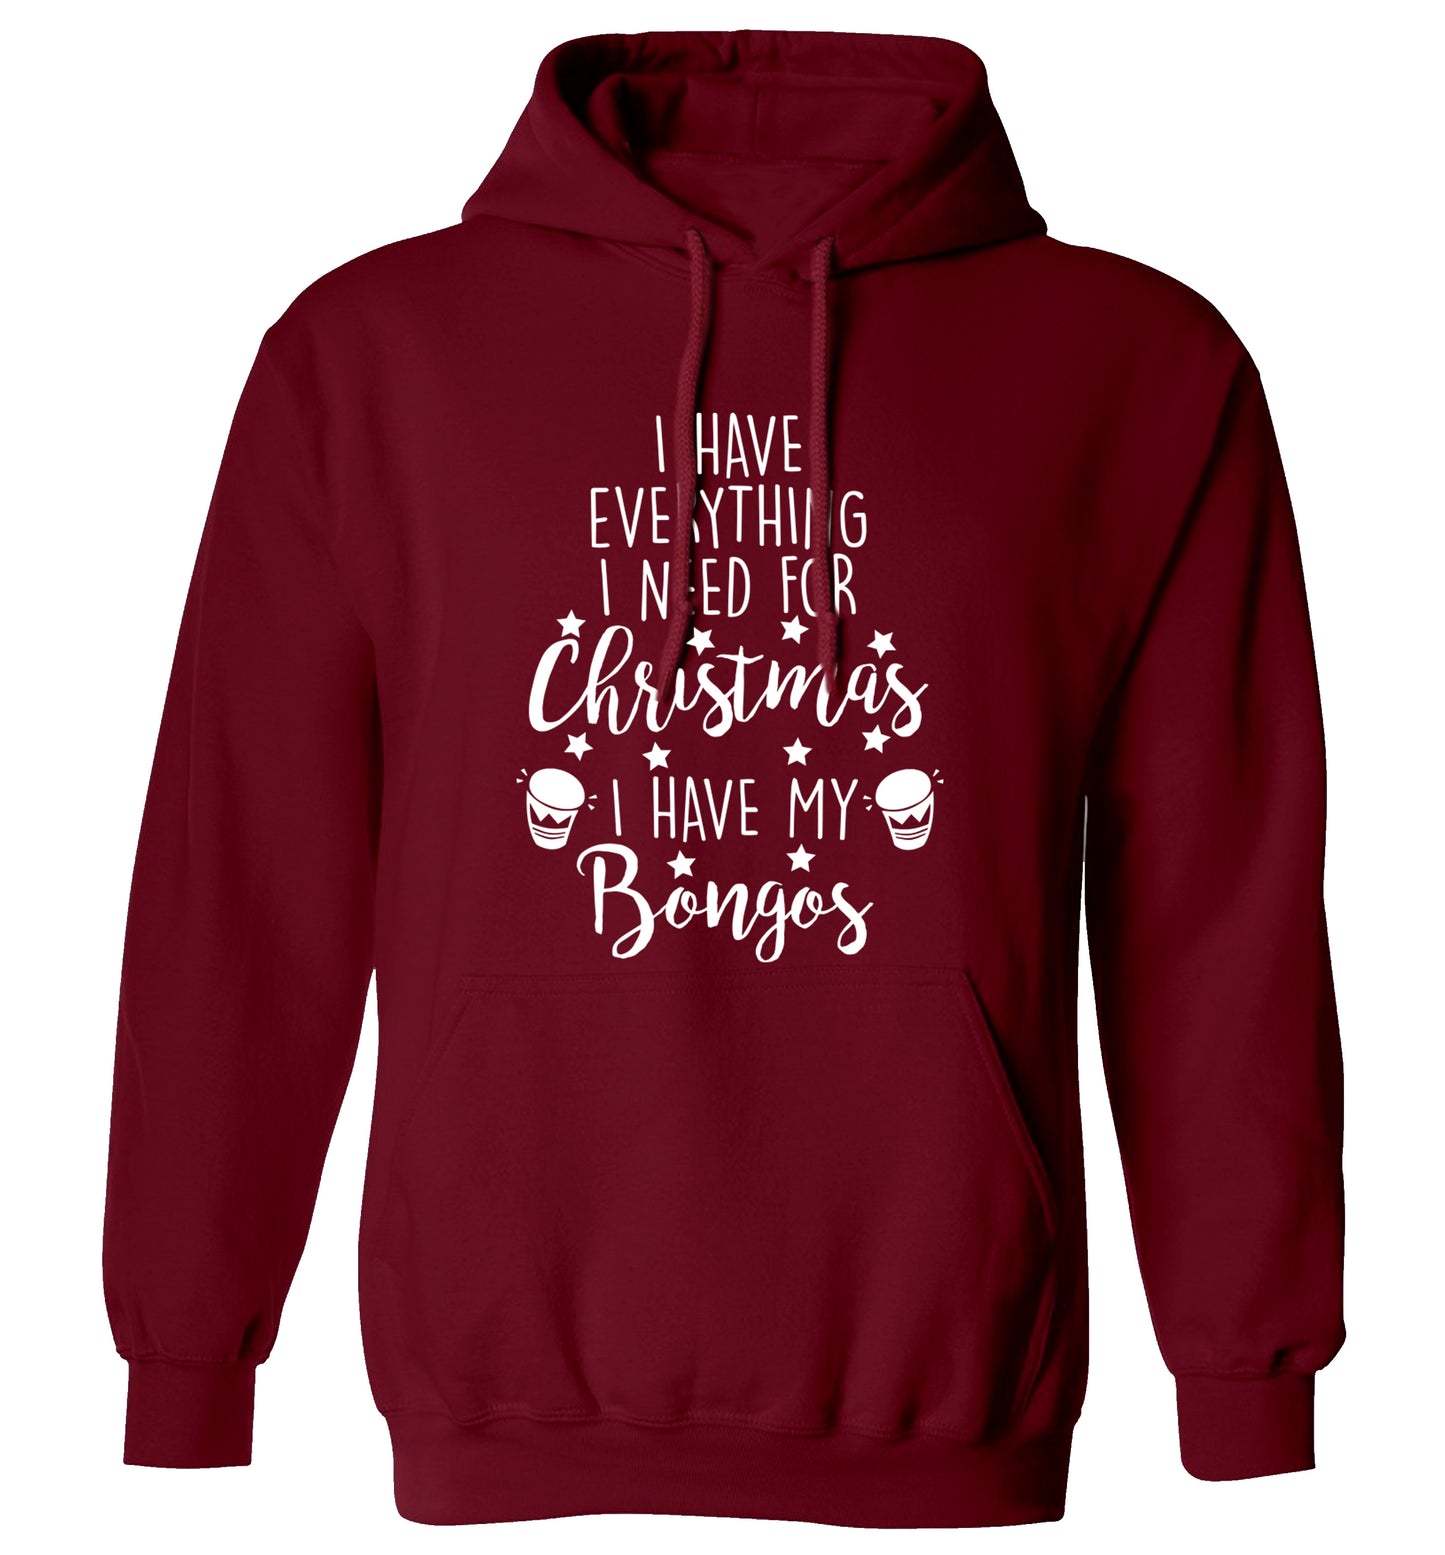 I have everything I need for Christmas I have my bongos! adults unisex maroon hoodie 2XL